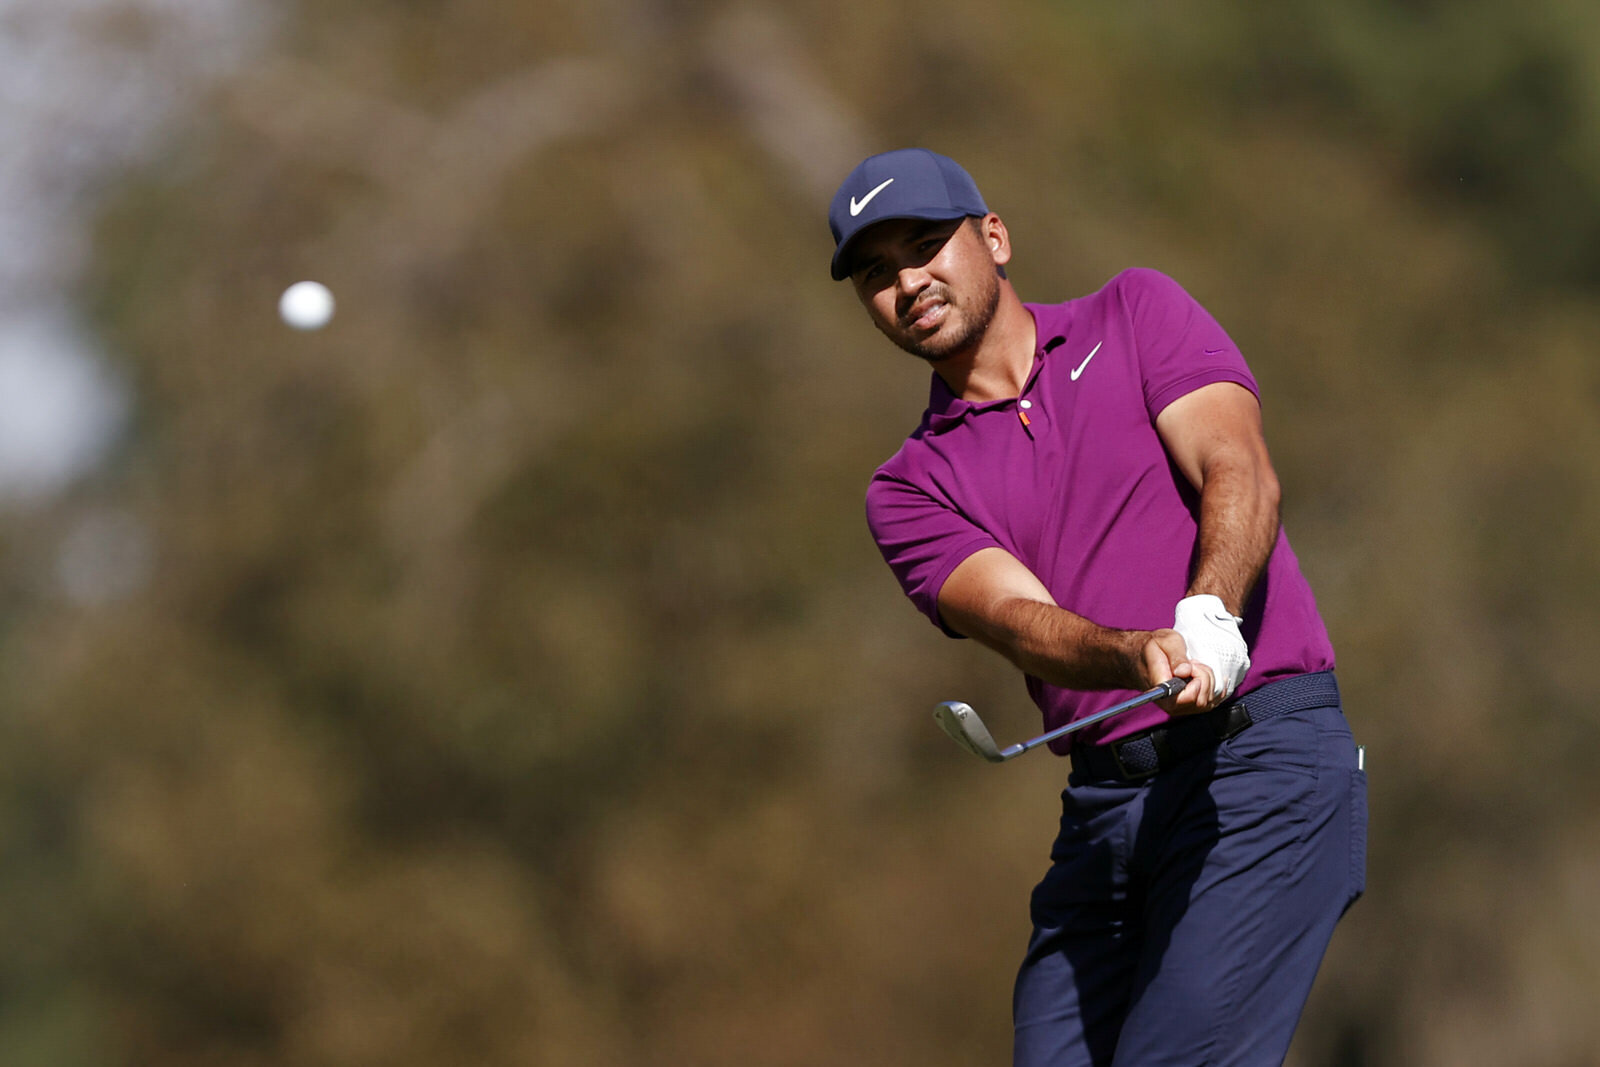  HOUSTON, TEXAS - NOVEMBER 07: Jason Day of Australia plays a shot on the fourth hole during the third round of the Houston Open at Memorial Park Golf Course on November 07, 2020 in Houston, Texas. (Photo by Carmen Mandato/Getty Images) 